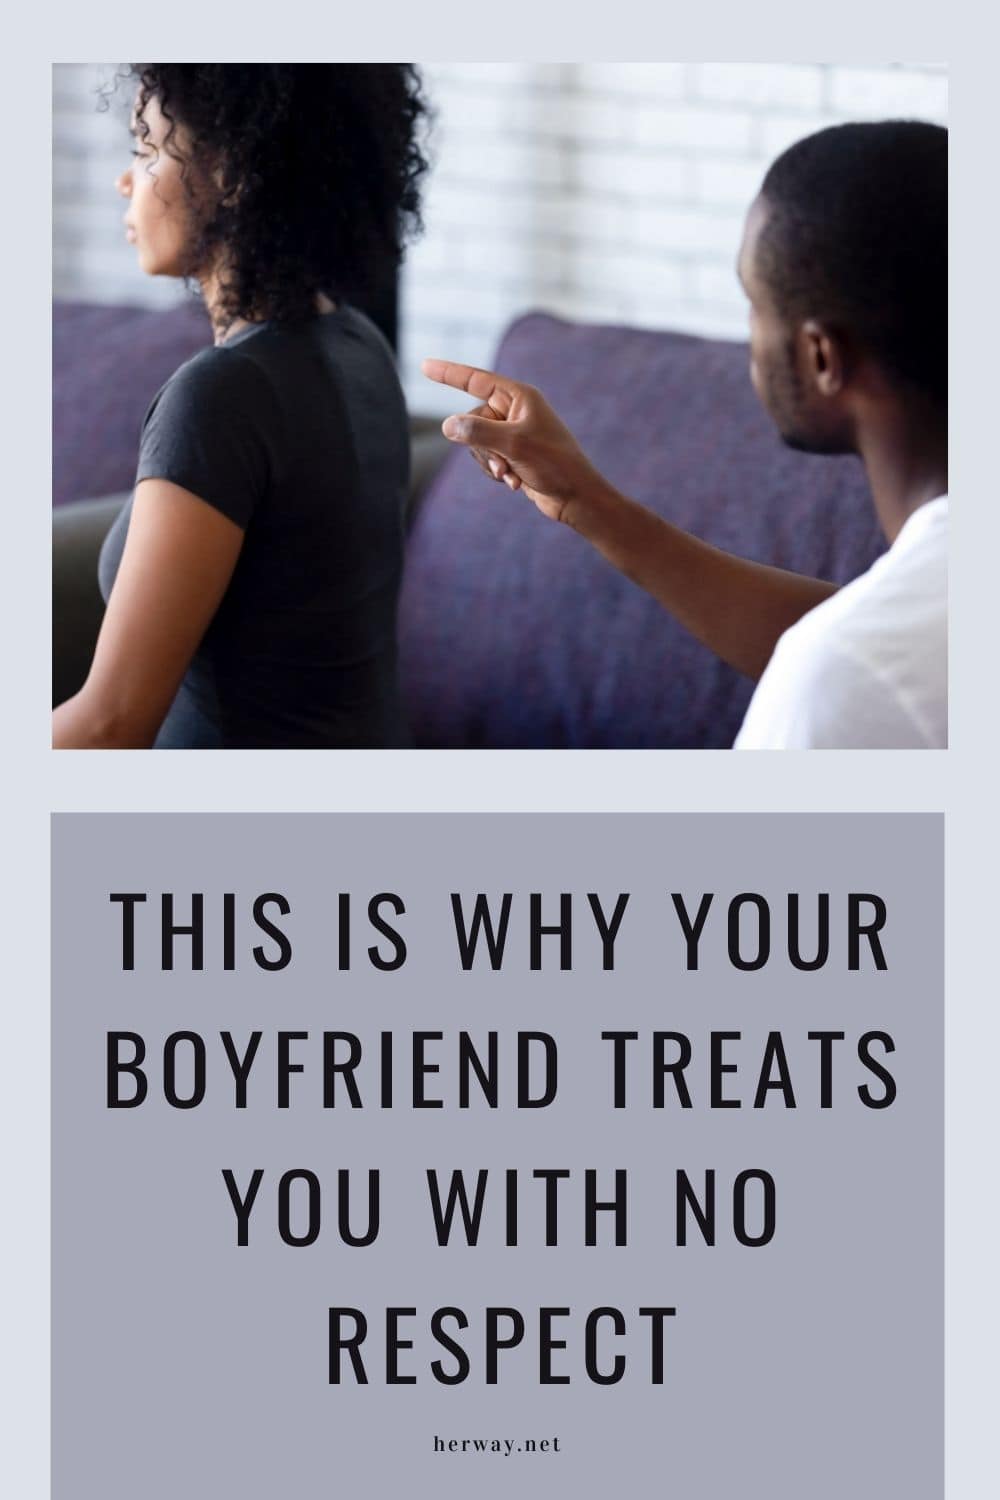 This is why Your Boyfriend Treats You With No Respect